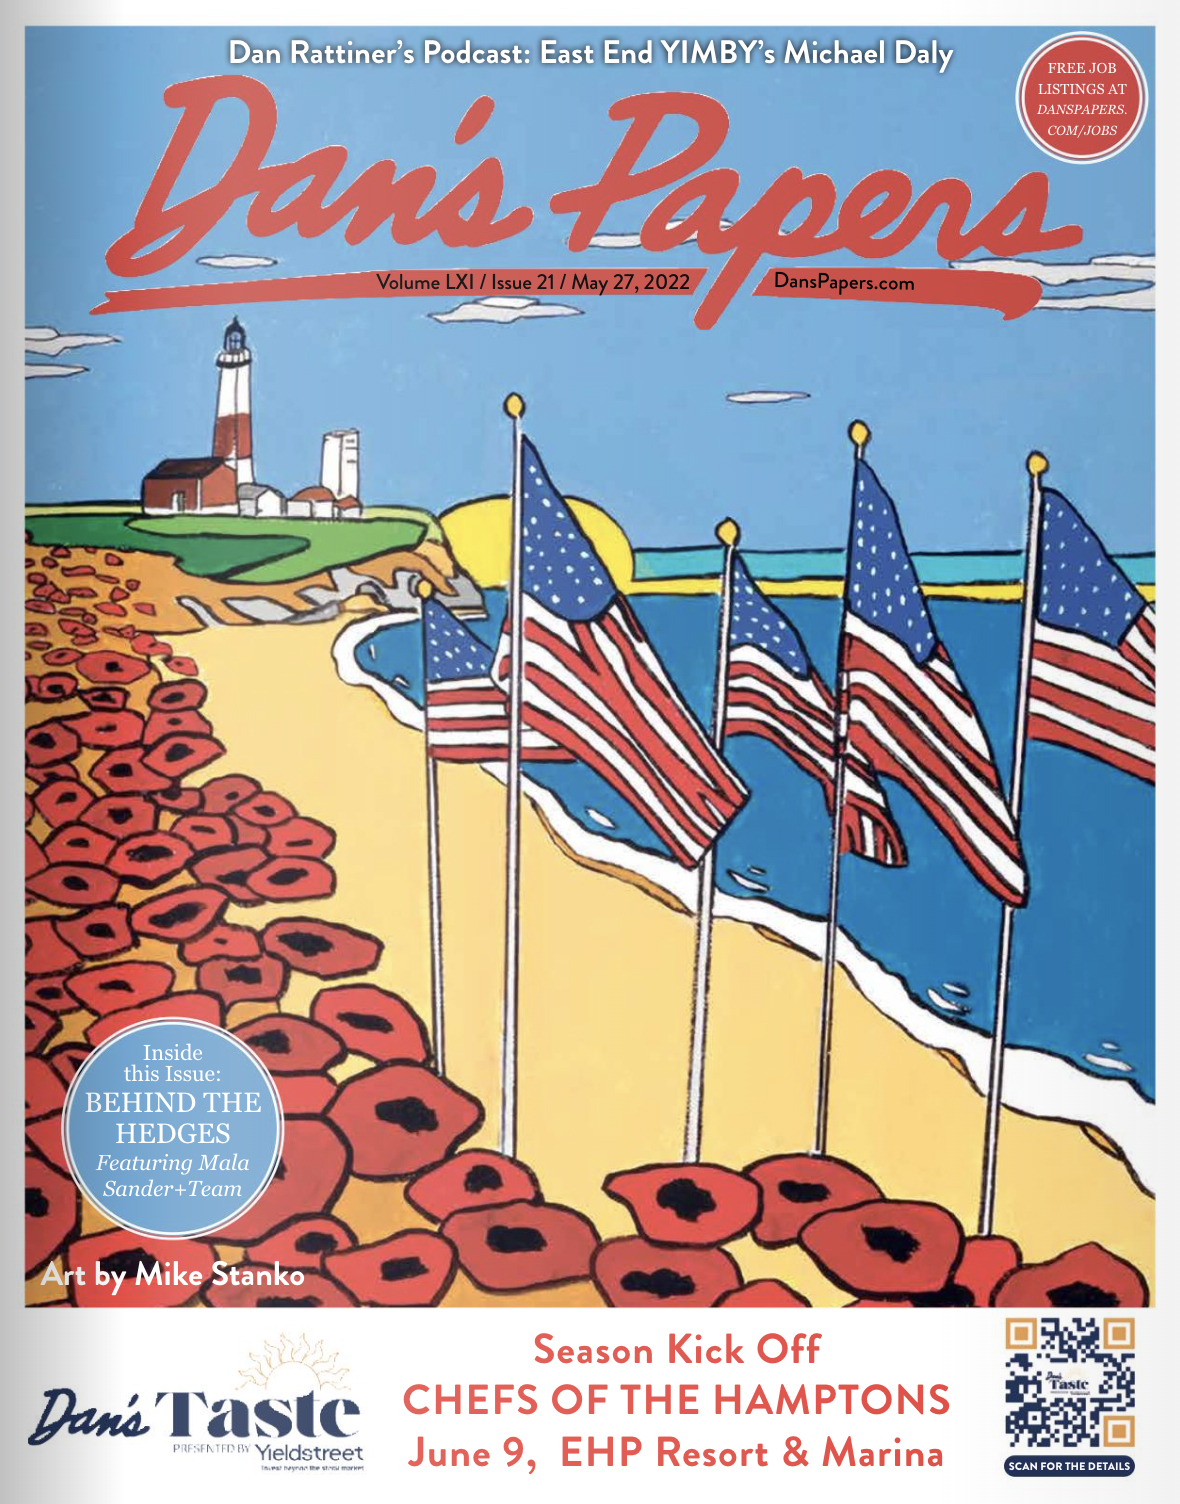 Dan's Papers May 27, 2022 cover art by Mike Stanko - Memorial Day Montauk Lighthouse